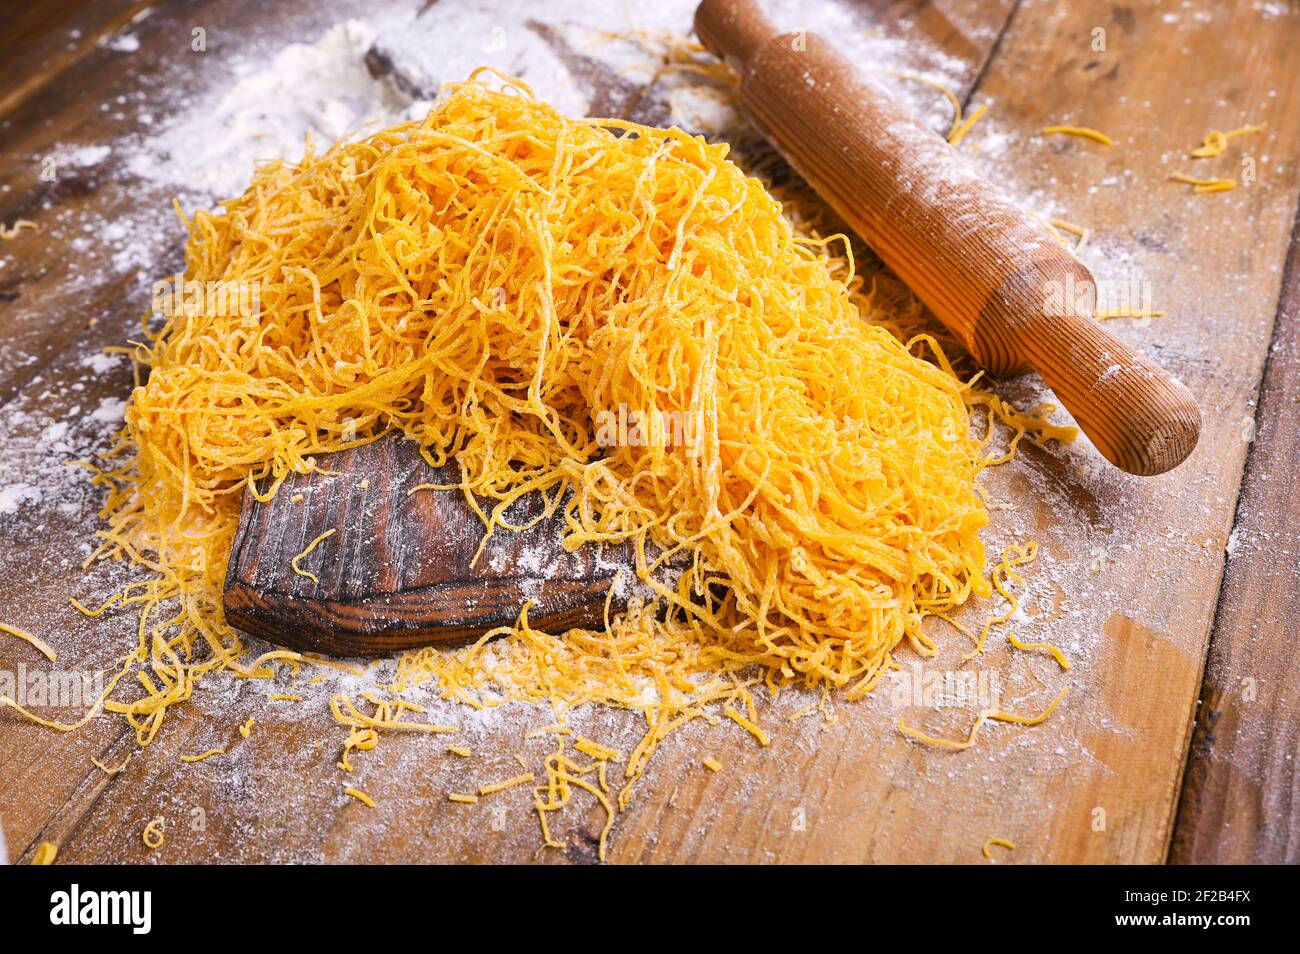 Tagliatelle pasta . Traditional Italian named Angel Hair (capellini d'angels). Woman cooking Italian egg pasta, homemade and fresh in flour on a cutting table.  Stock Photo